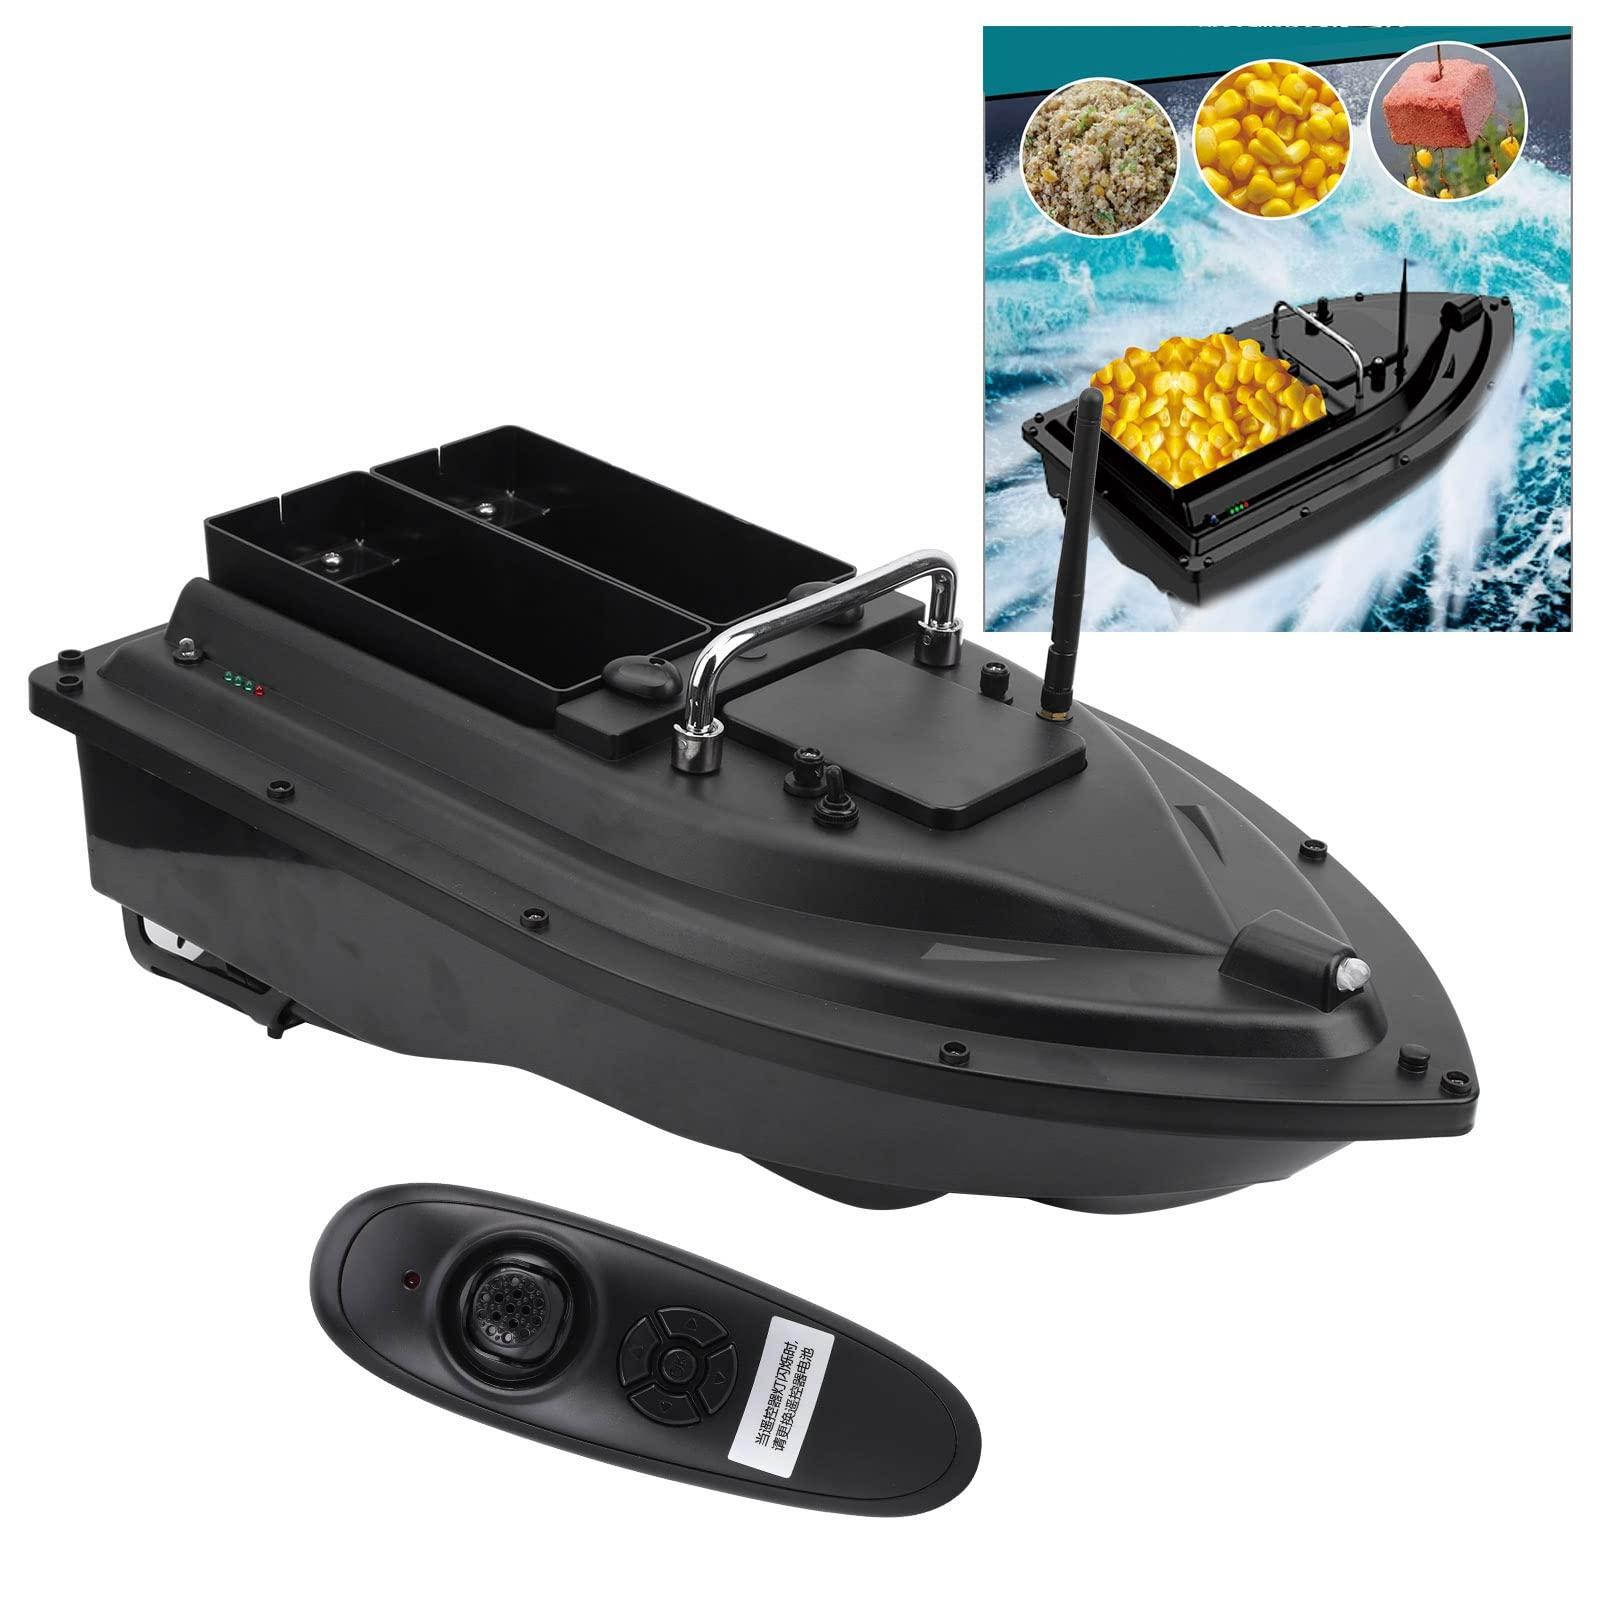 Rc Boat Fish Finder: Key Considerations for Choosing an RC Boat Fish Finder